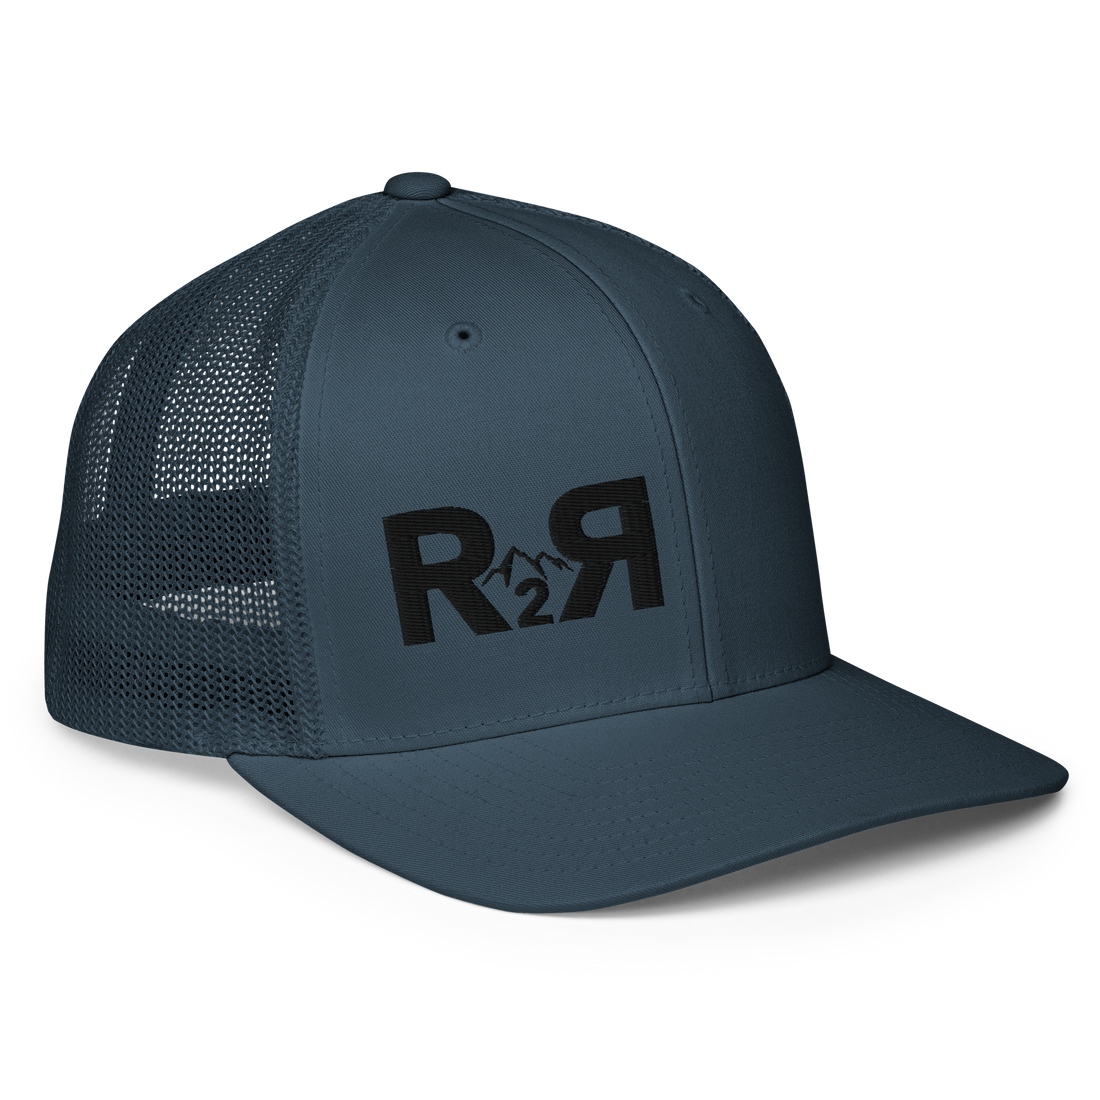  R2R River to Ridge Clothing Brand Logo flex fit hat in navy with logo stitched in black